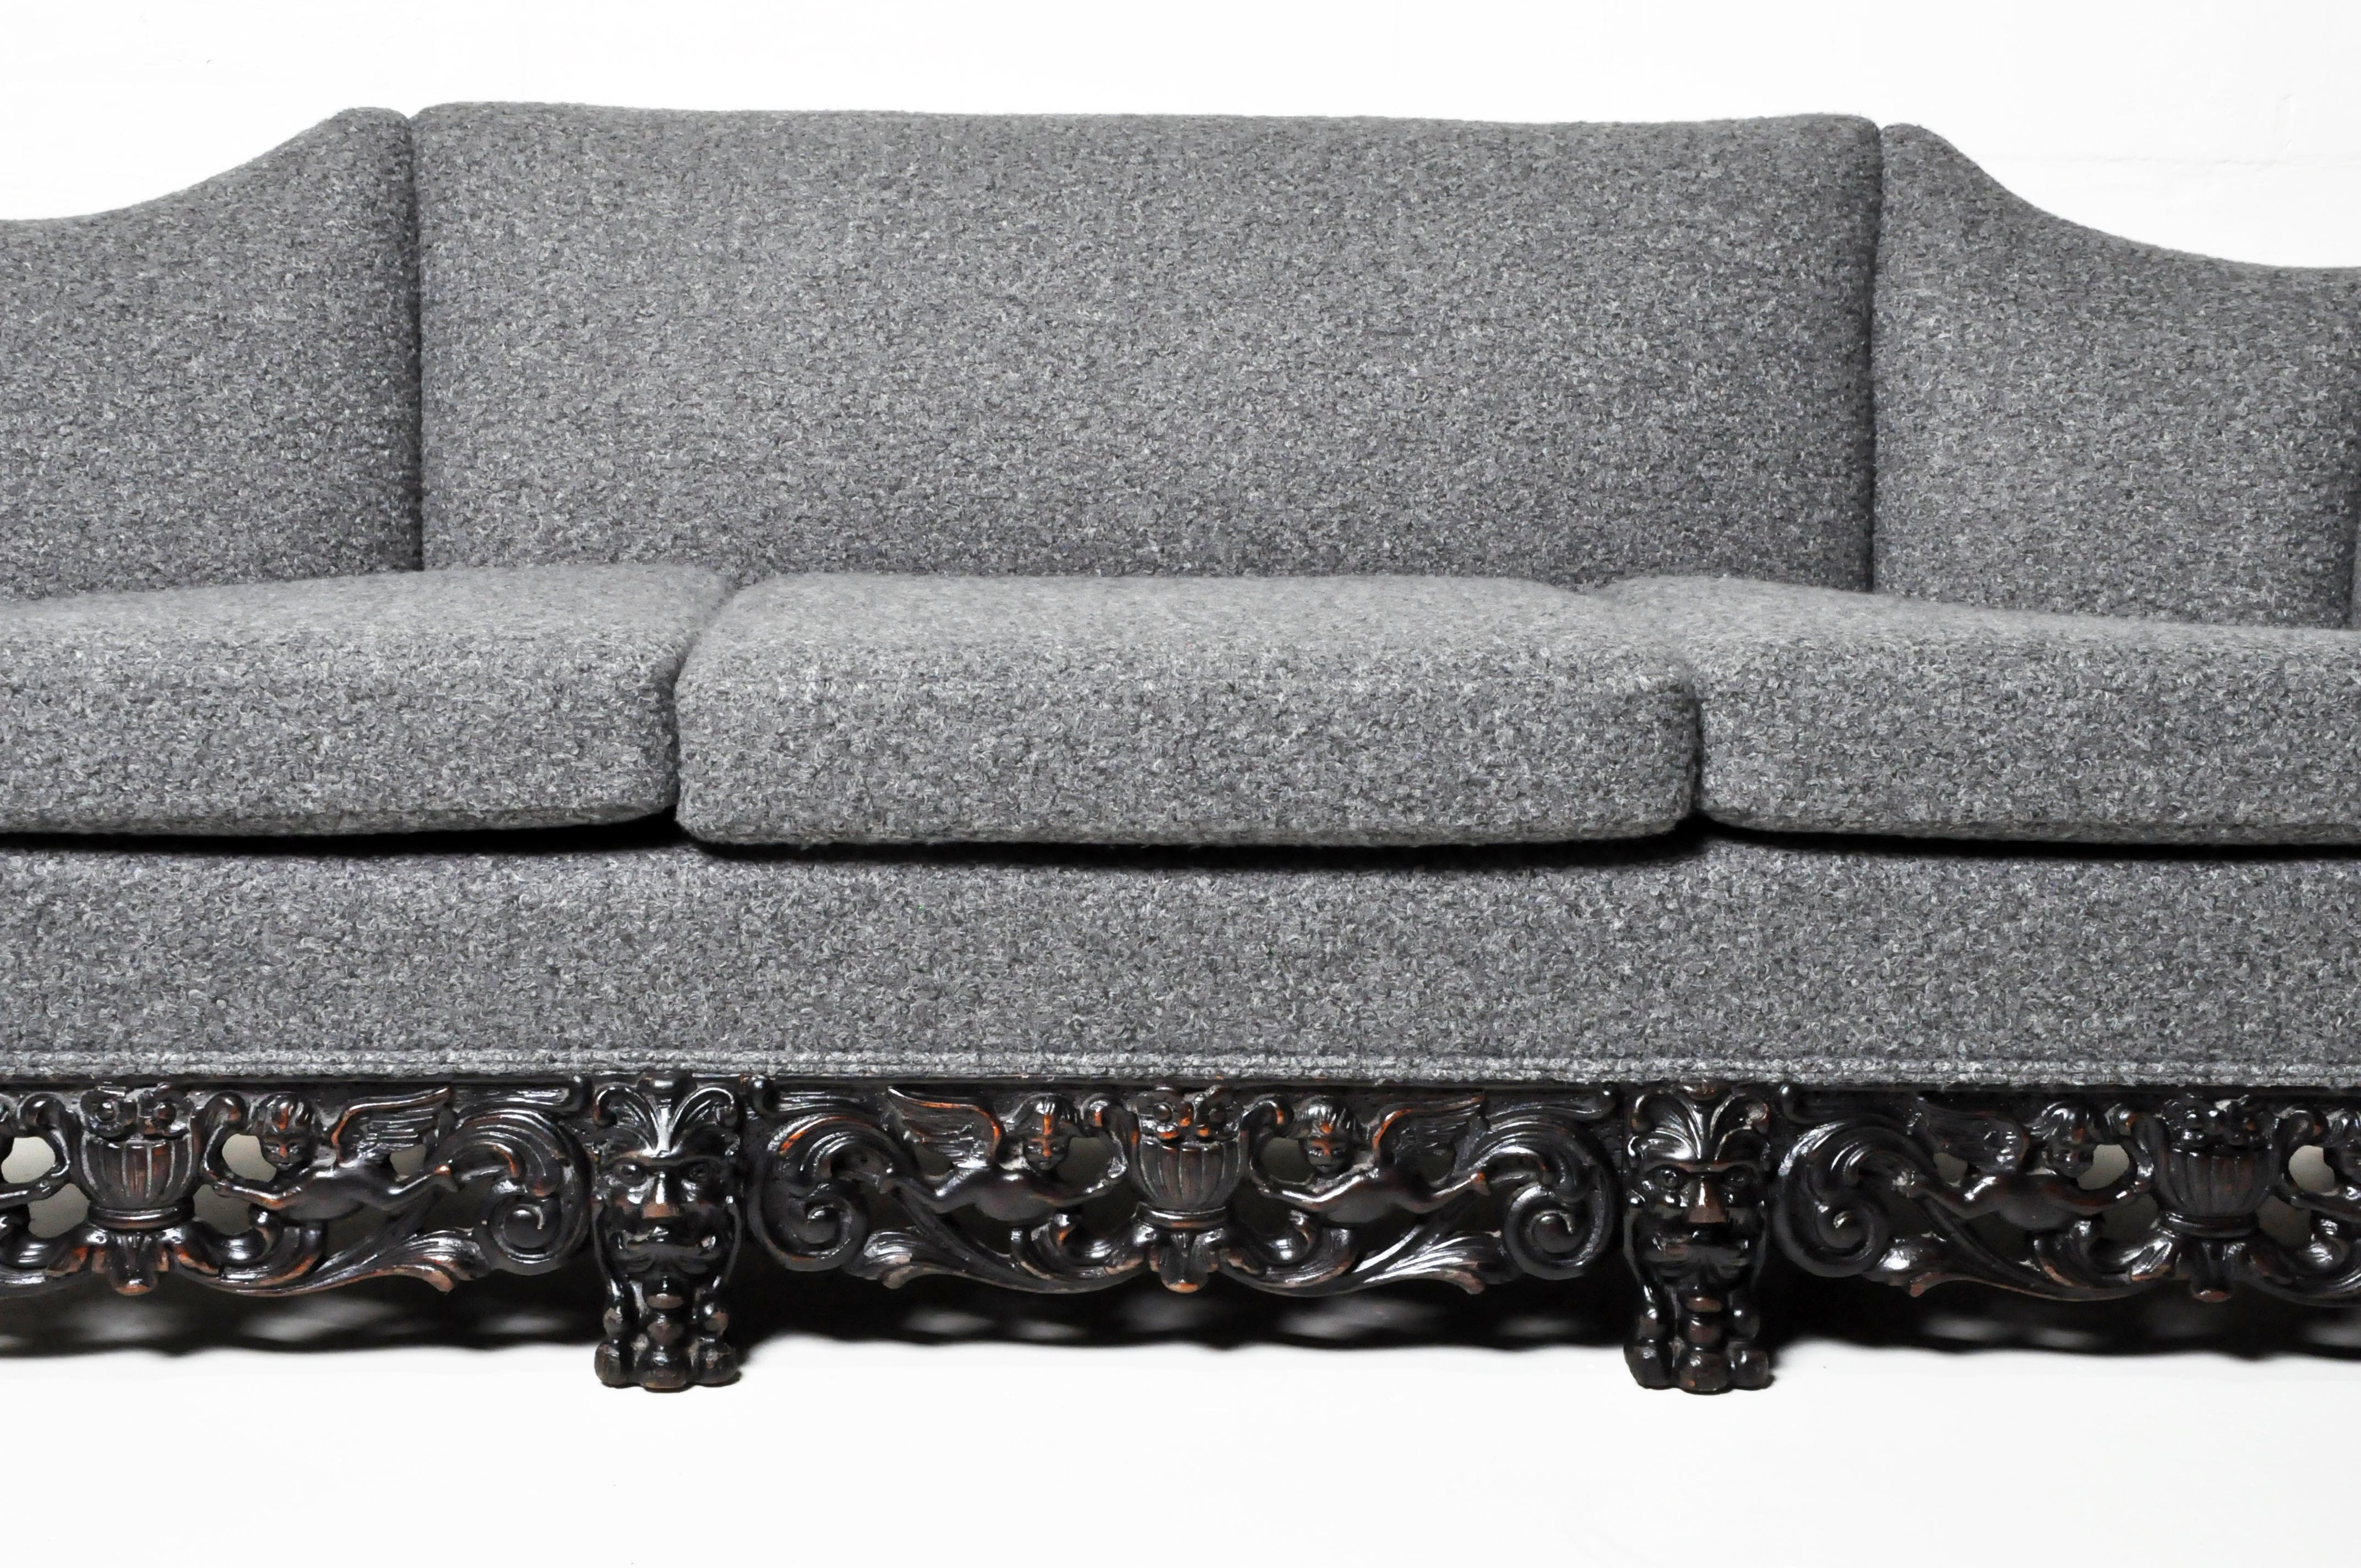 English Gothic Revival Sofa For Sale